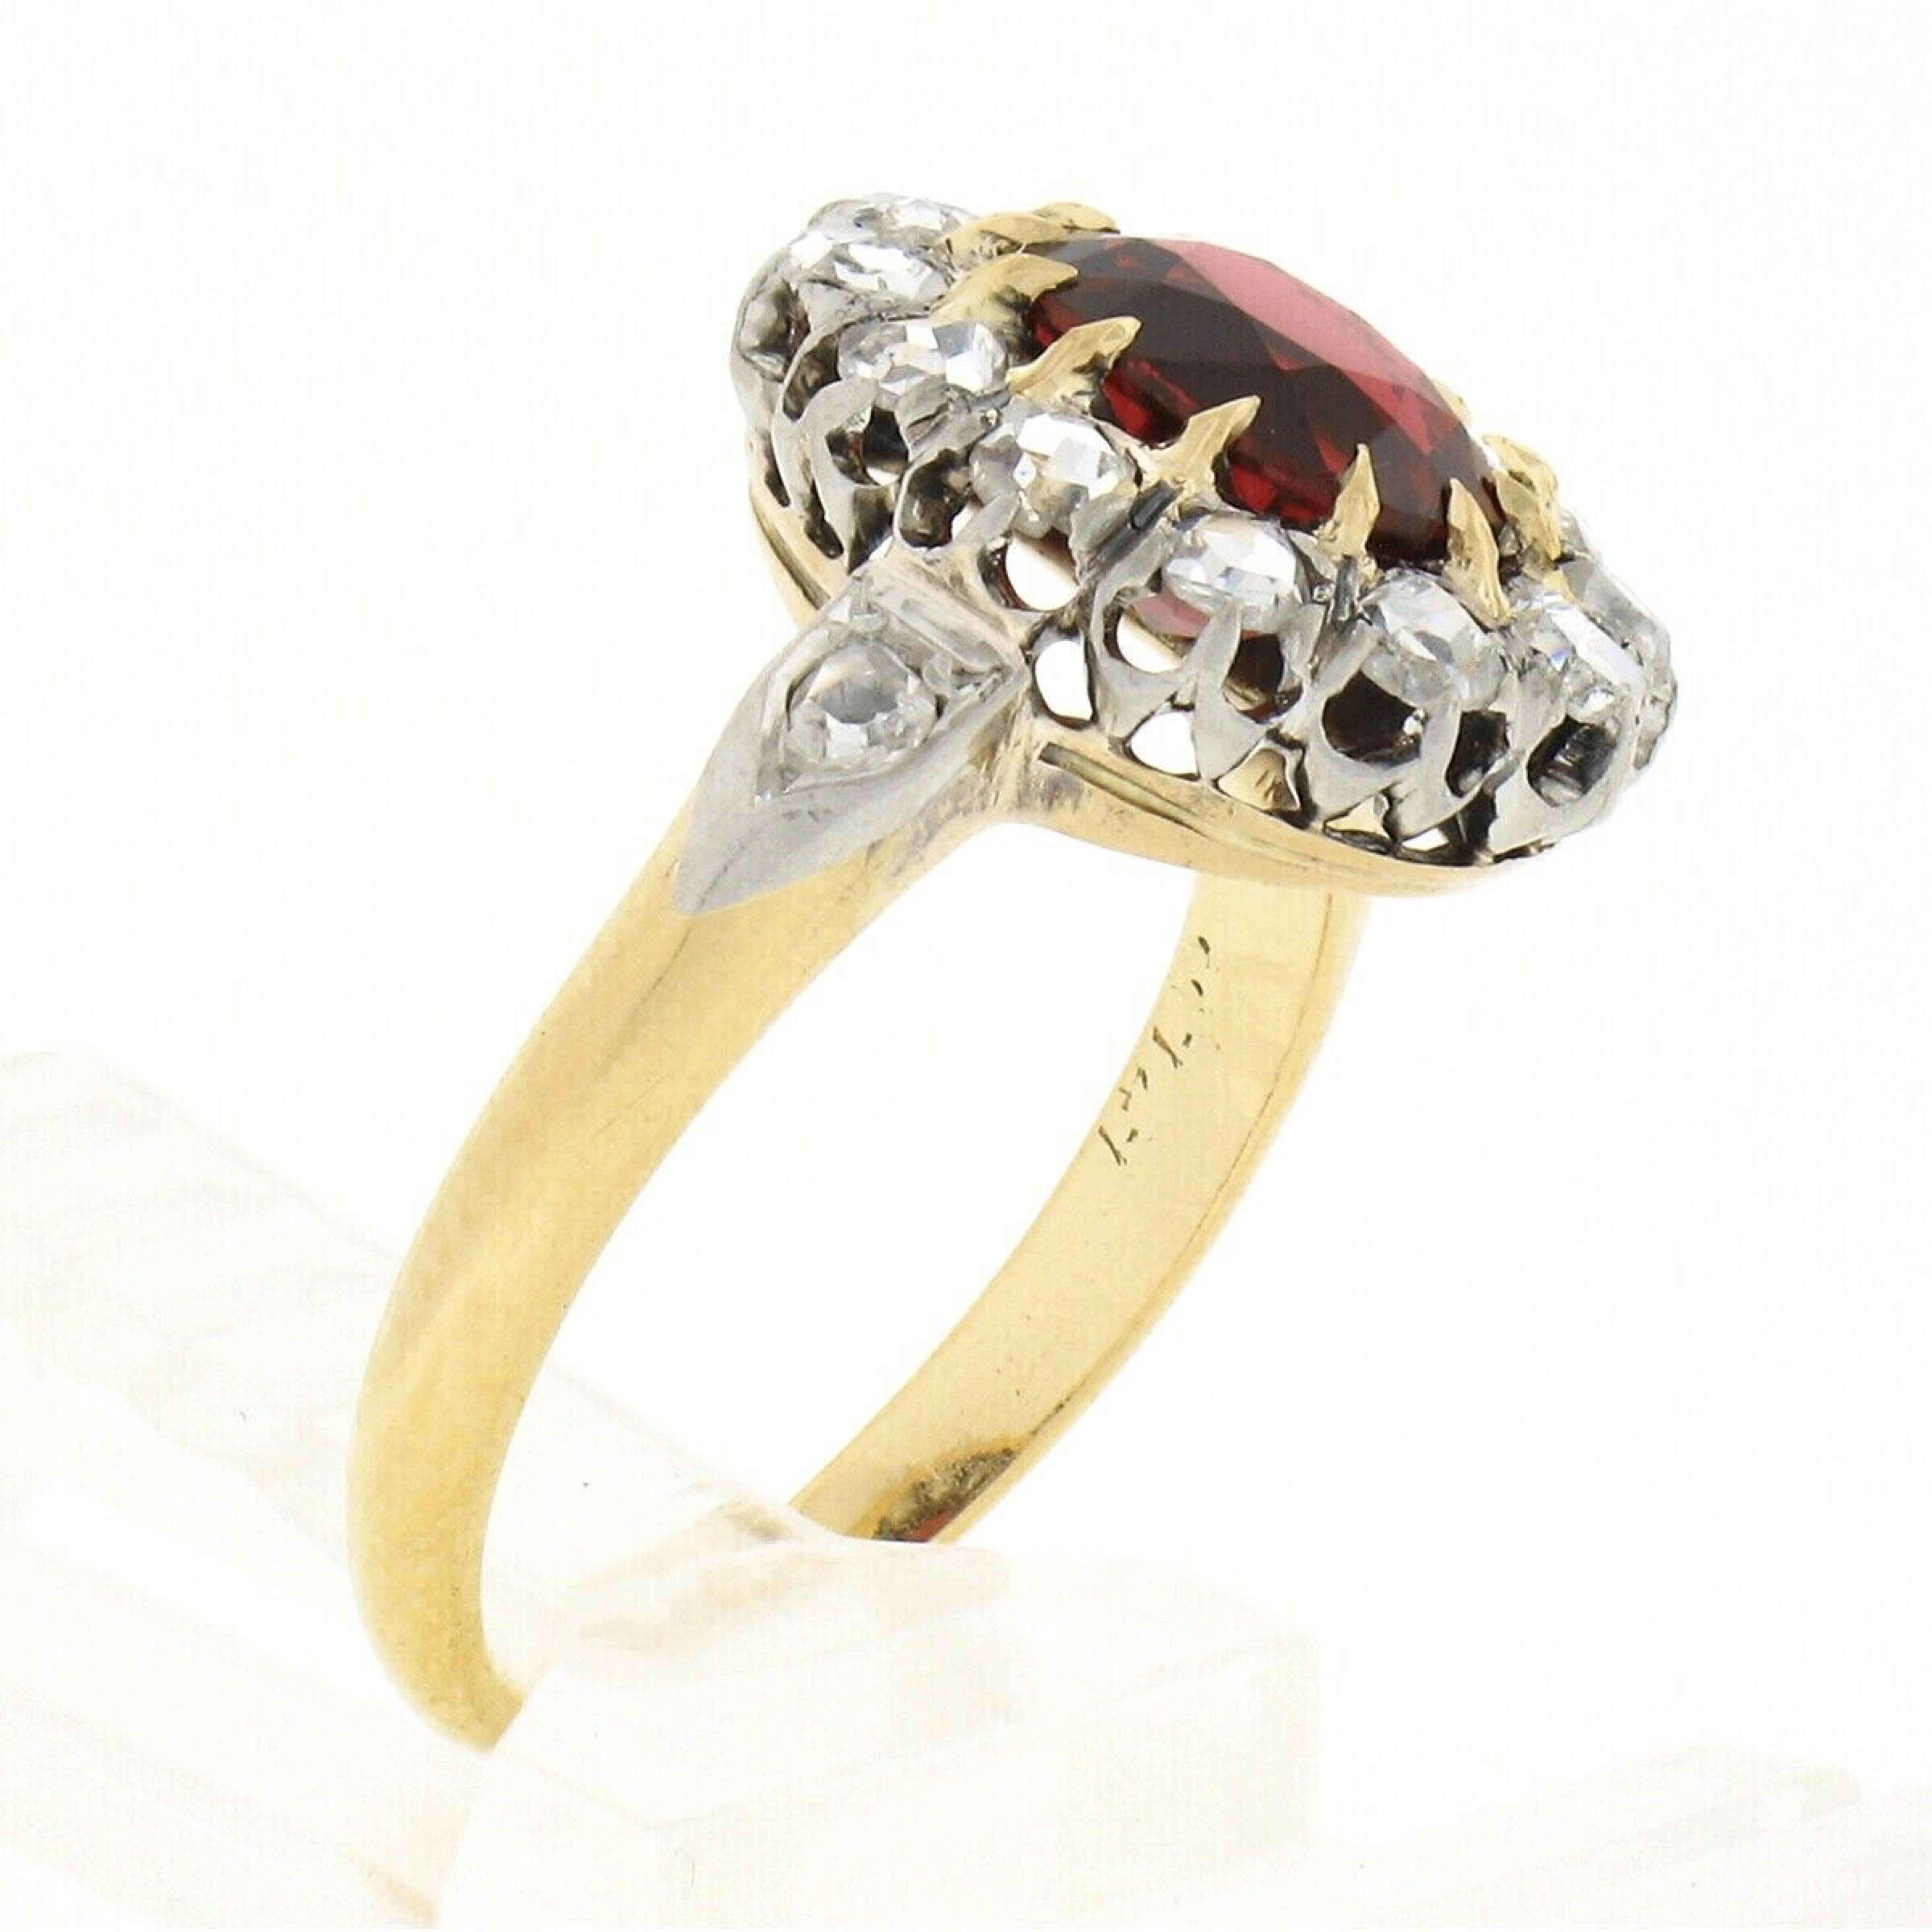 Antique Victorian 18k Gold Platinum GIA BURMA RED Spinel Diamond Halo Ring For Sale 2